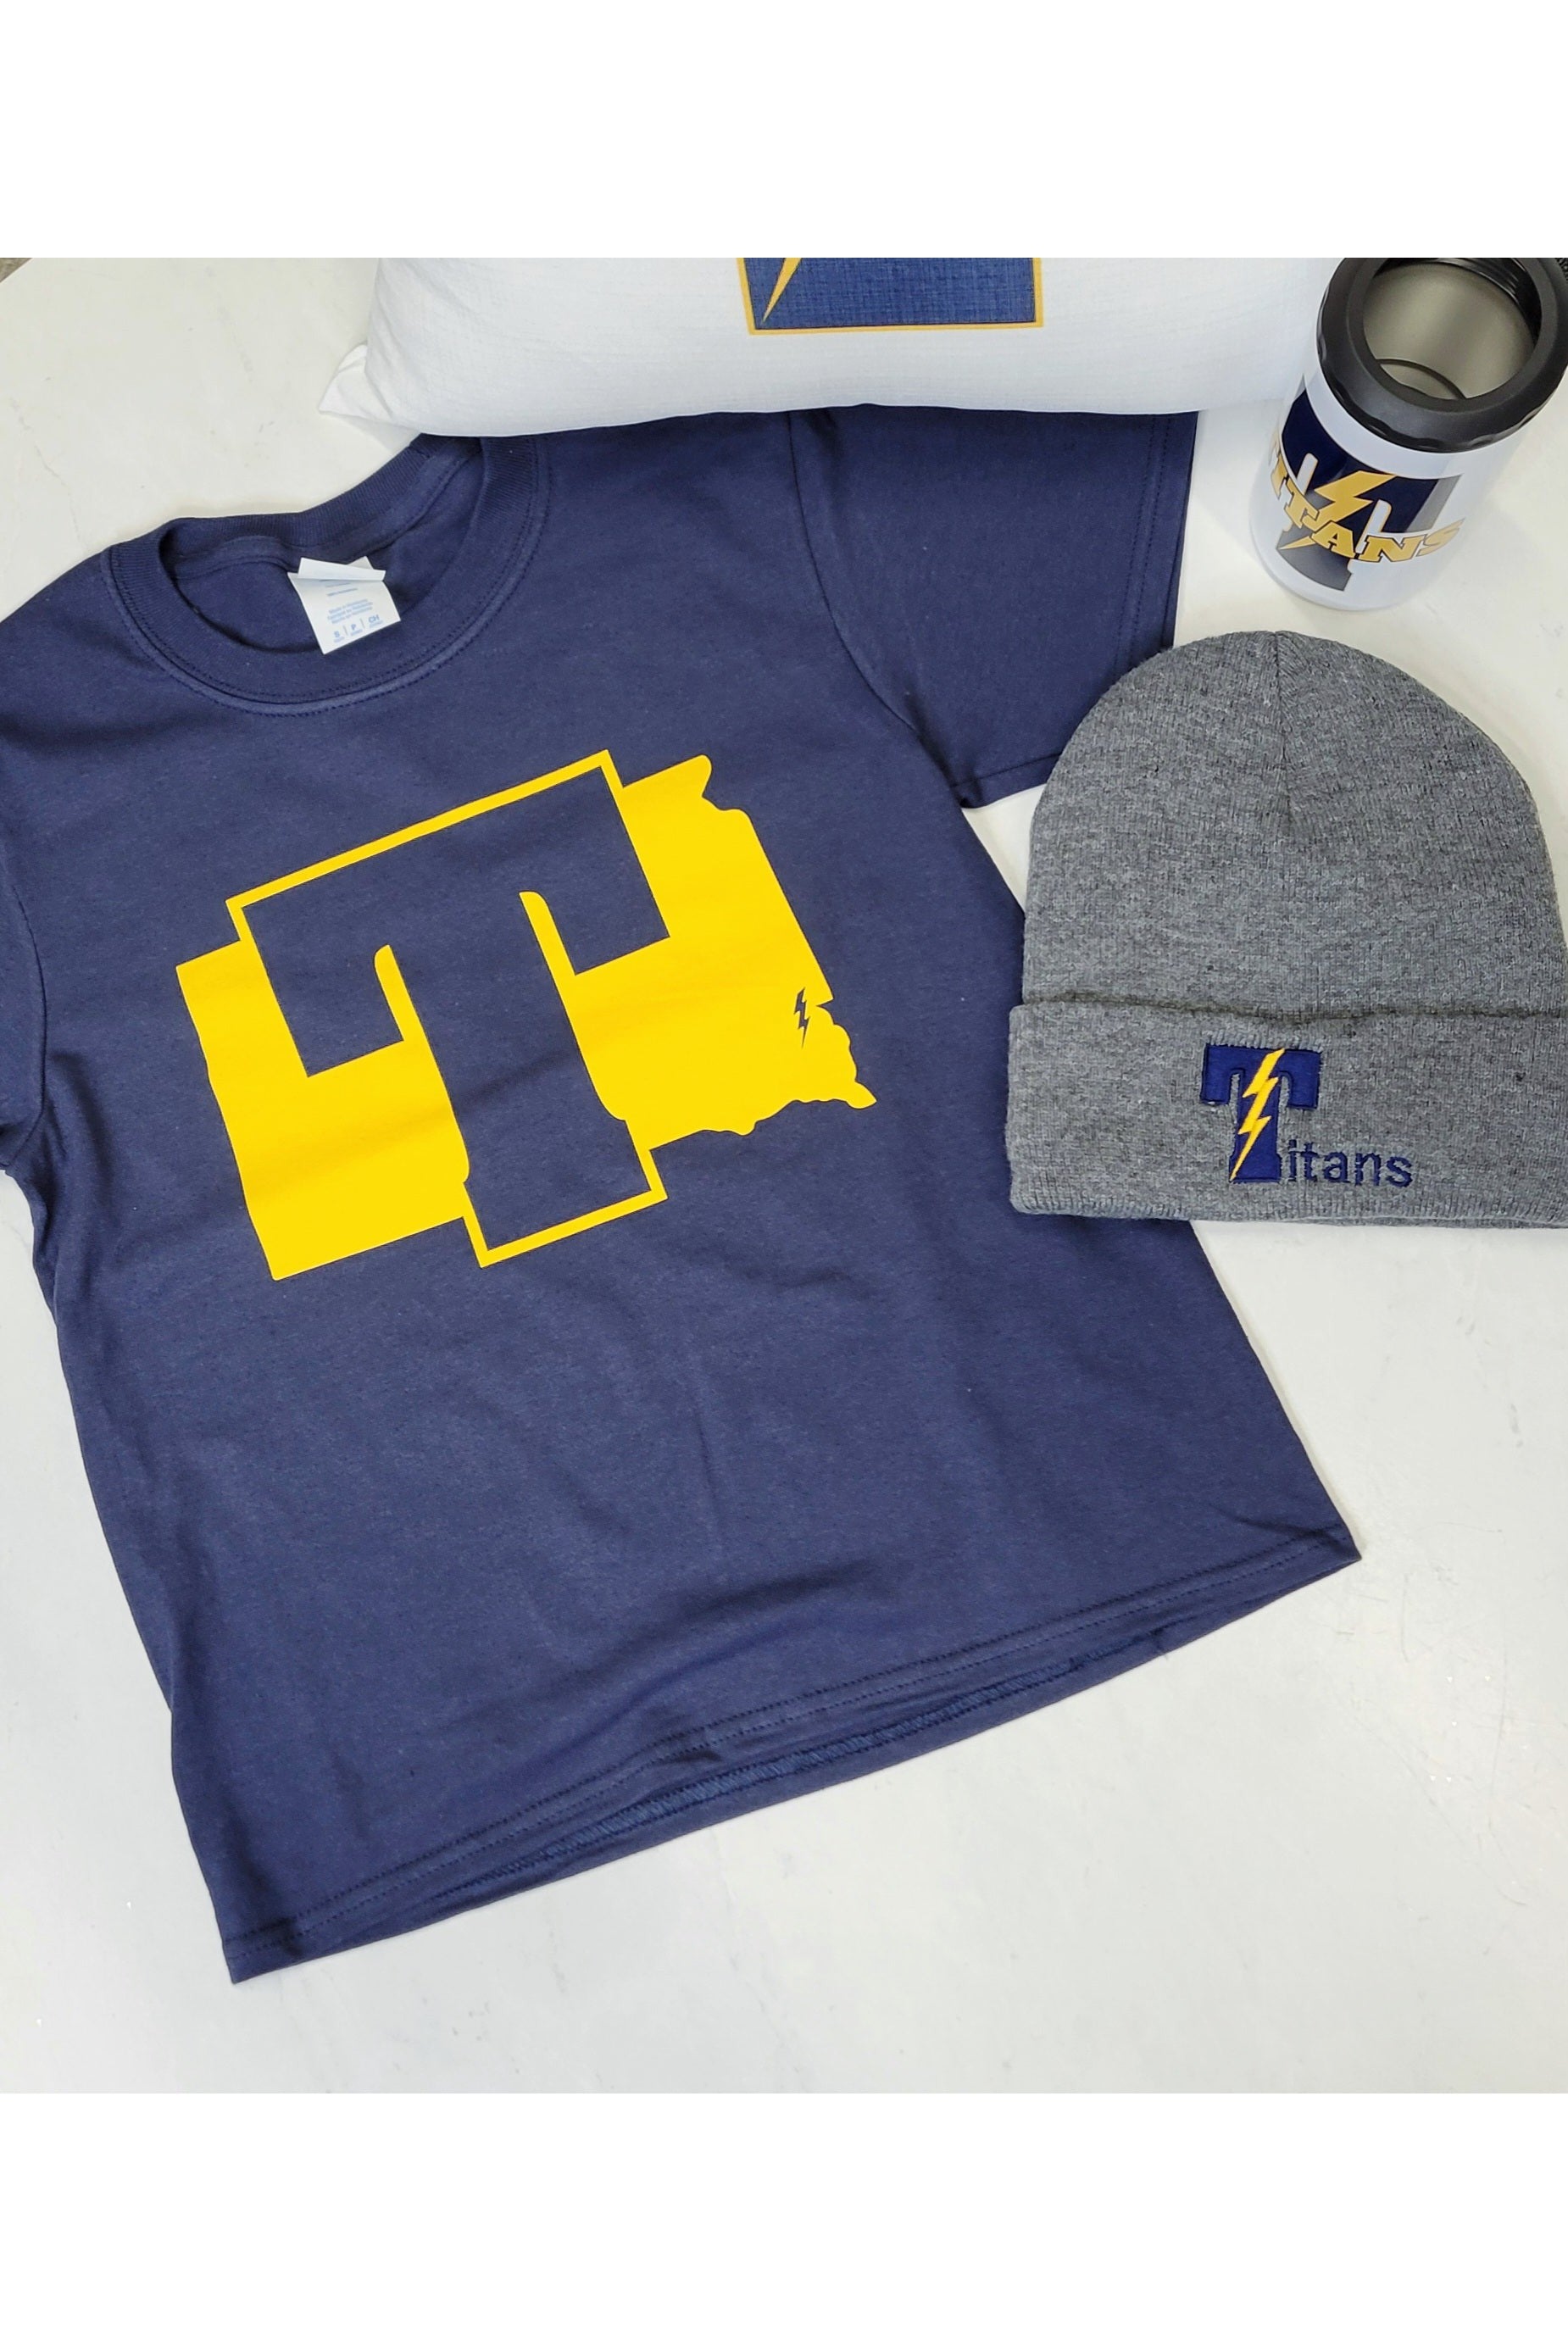 Titans SD Graphic Tee- Youth & Adult-Tea Titans-Revive Boutique-YOUTH Xtra-Small-Revive Boutique